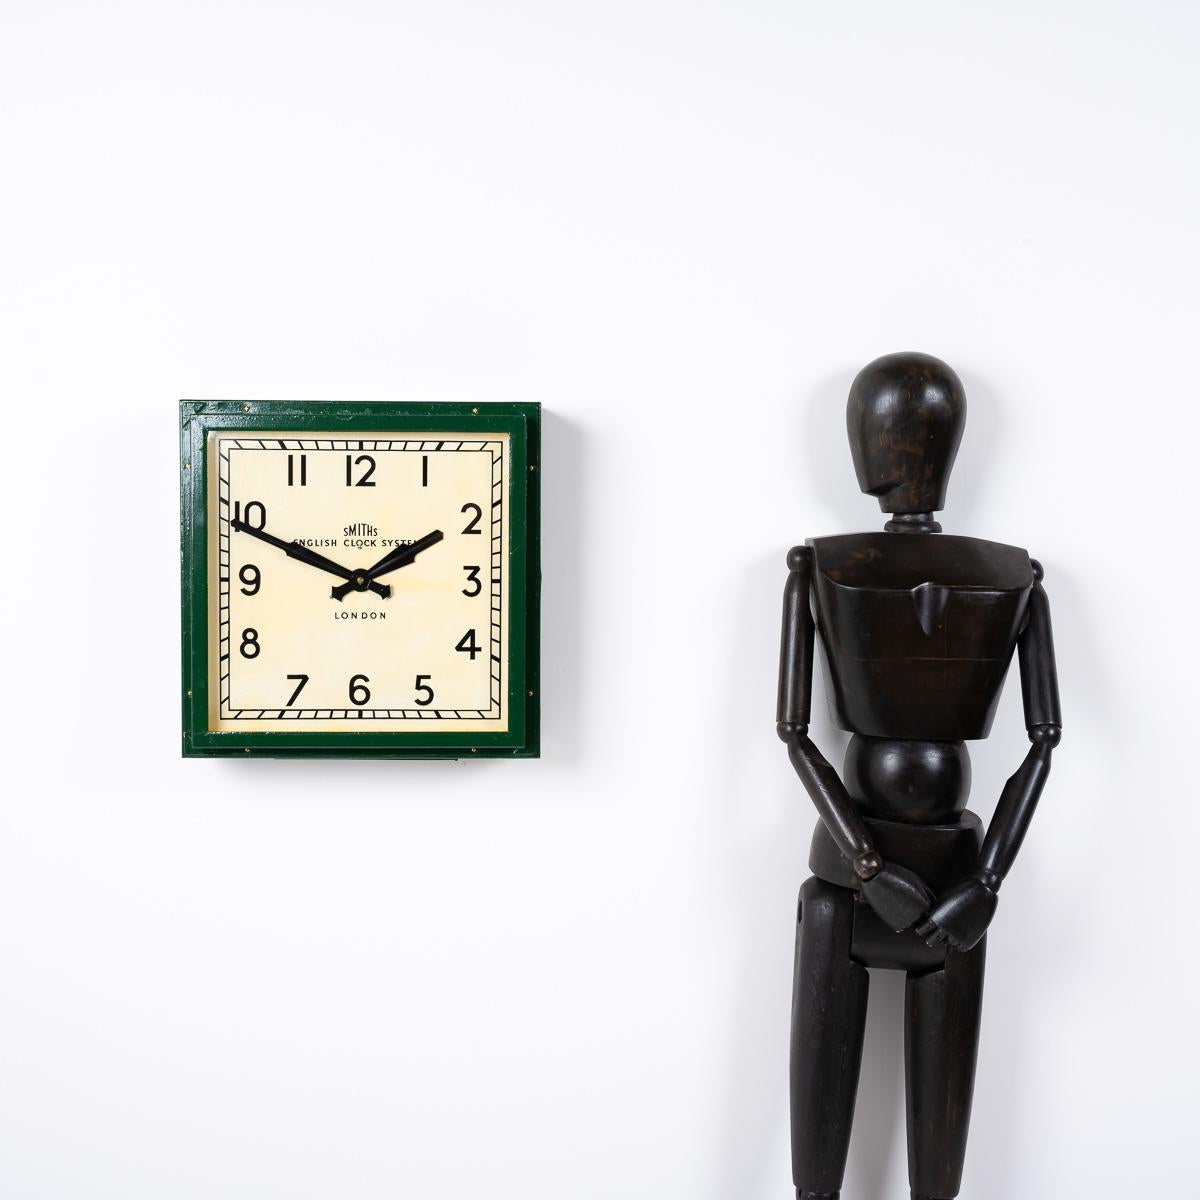 Original Reclaimed Large Square Factory Clock by Smiths English Clock Systems Ltd

A superb original vintage factory clock reclaimed from British makers English Clock Systems Ltd.

This Art Deco inspired clock is likely an early 1940's version when